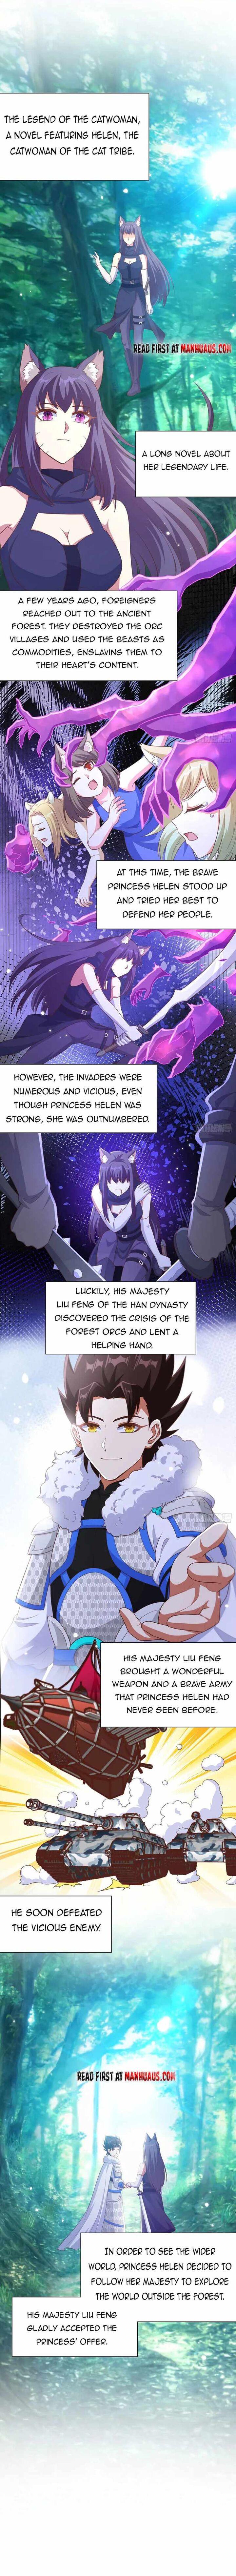 Starting From Today Ill Work As A City Lord Chapter 477 Page 1